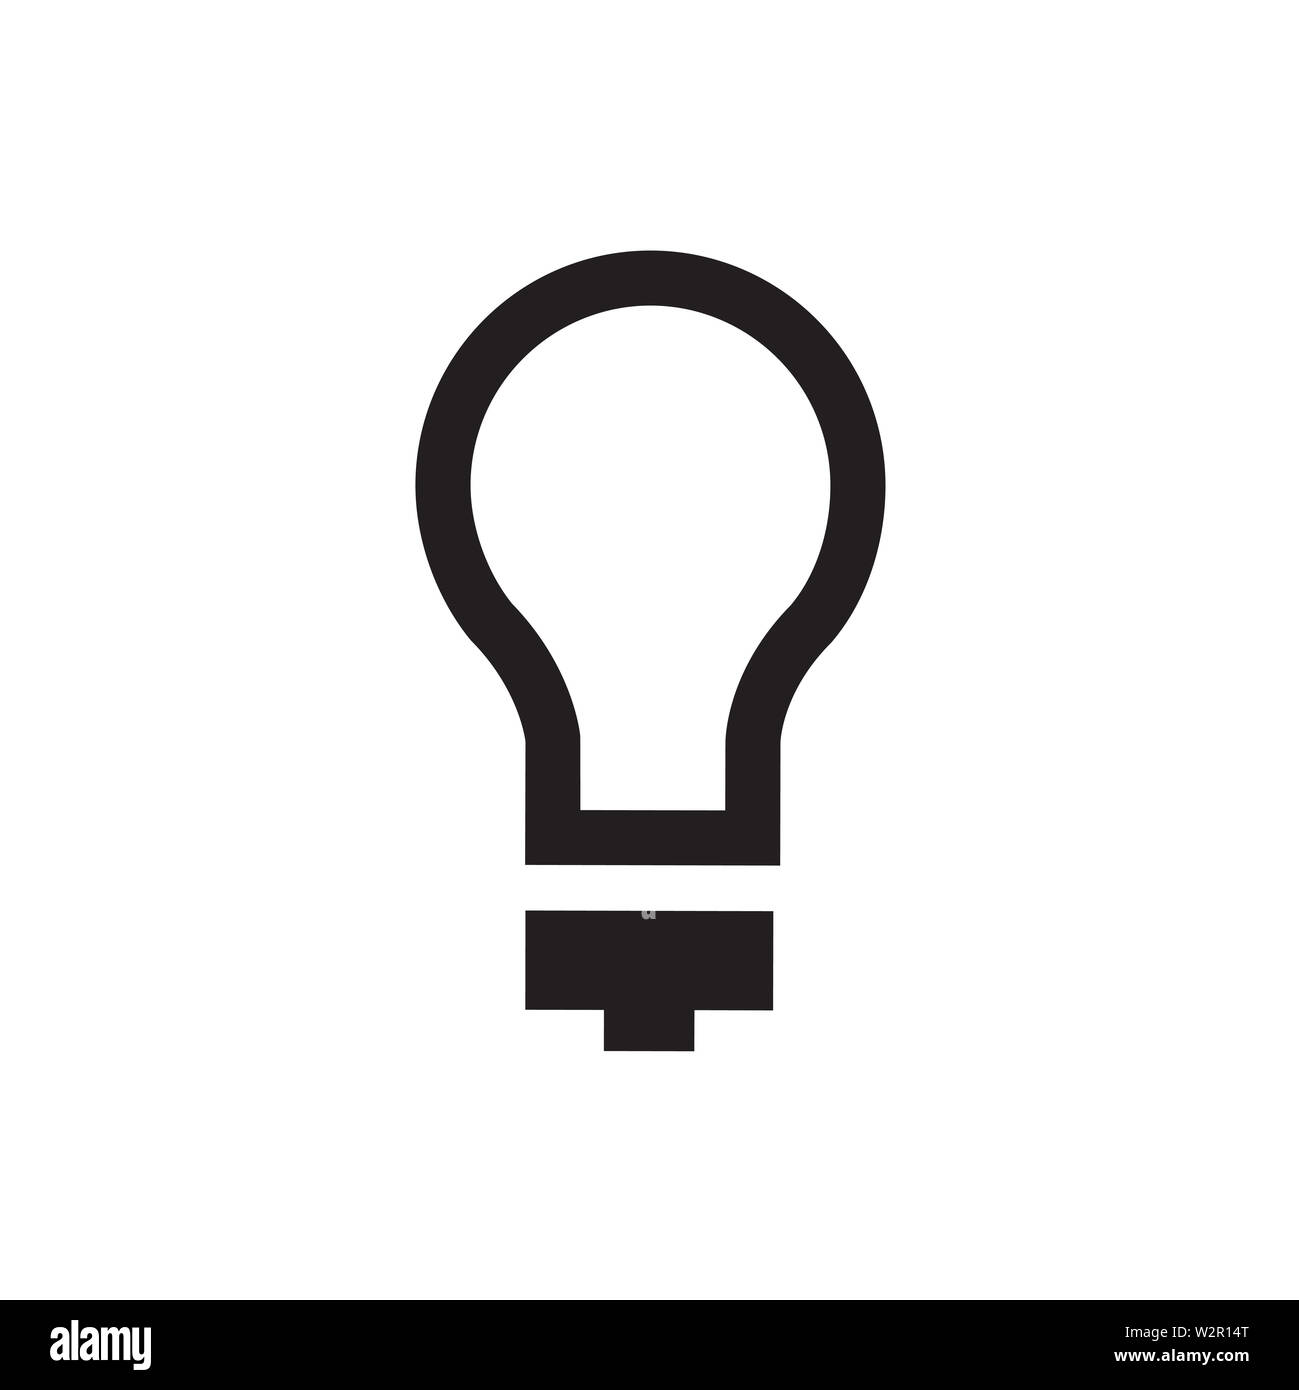 Light Bulb Icon In Flat Style Vector For App, UI, Websites. Black Icon Vector Illustration. Stock Photo